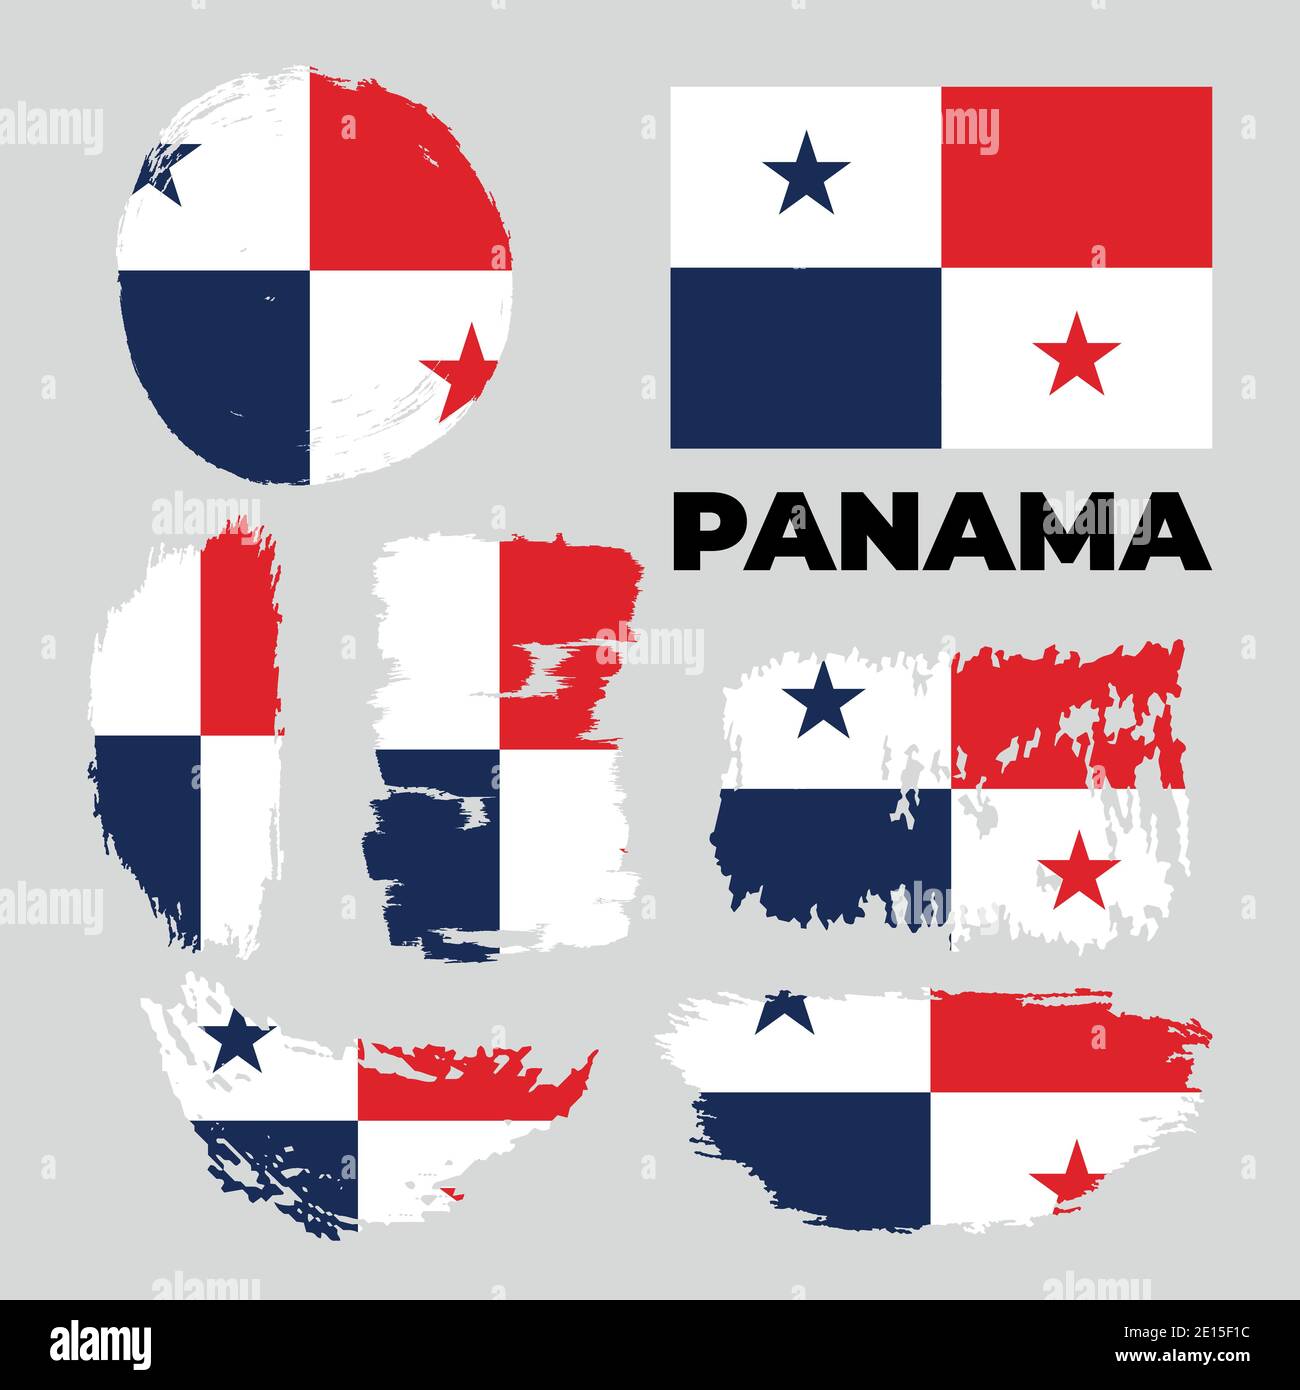 Classic grunge flag of Panama country. Happy independence day of Panama. Stock Vector